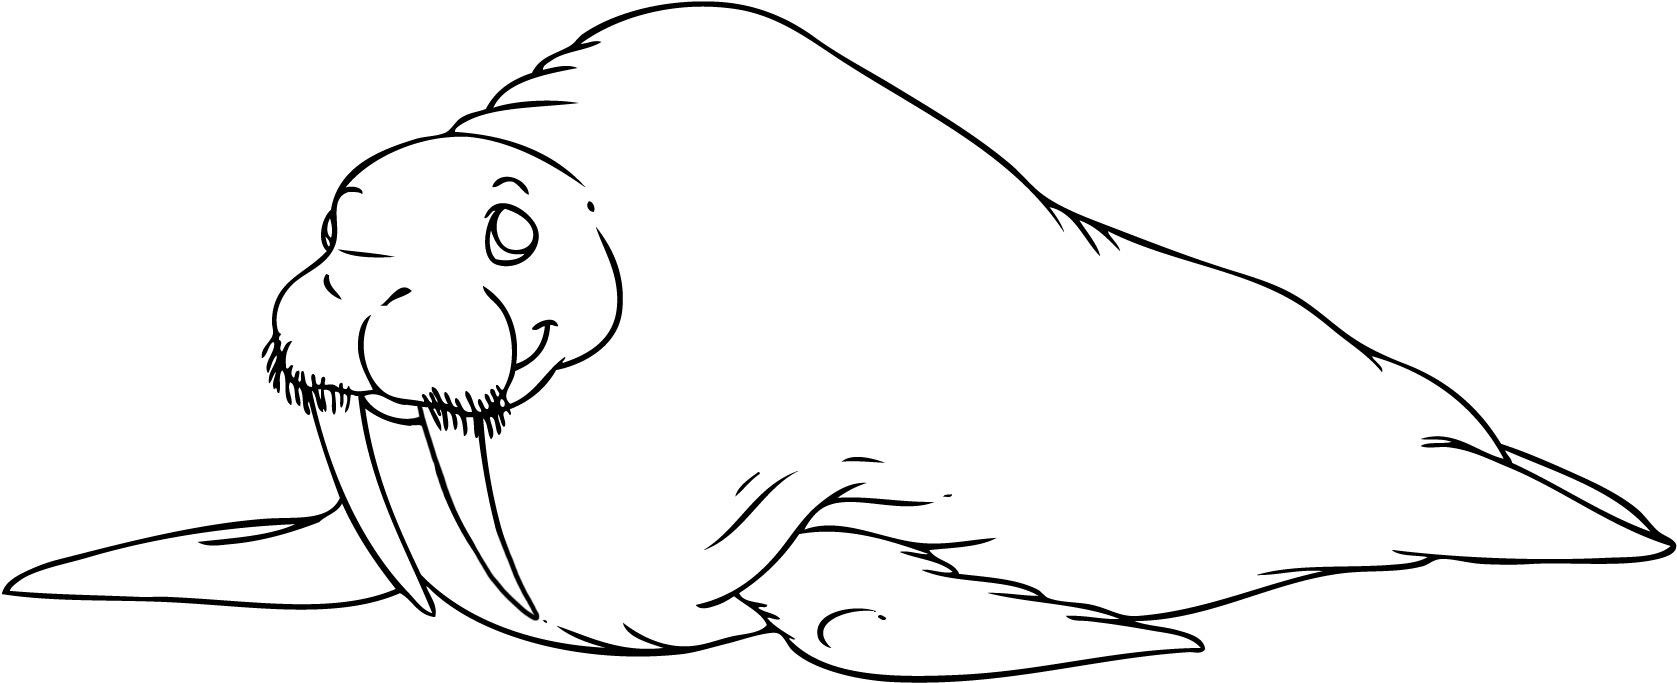 walrlus coloring pages - photo #31